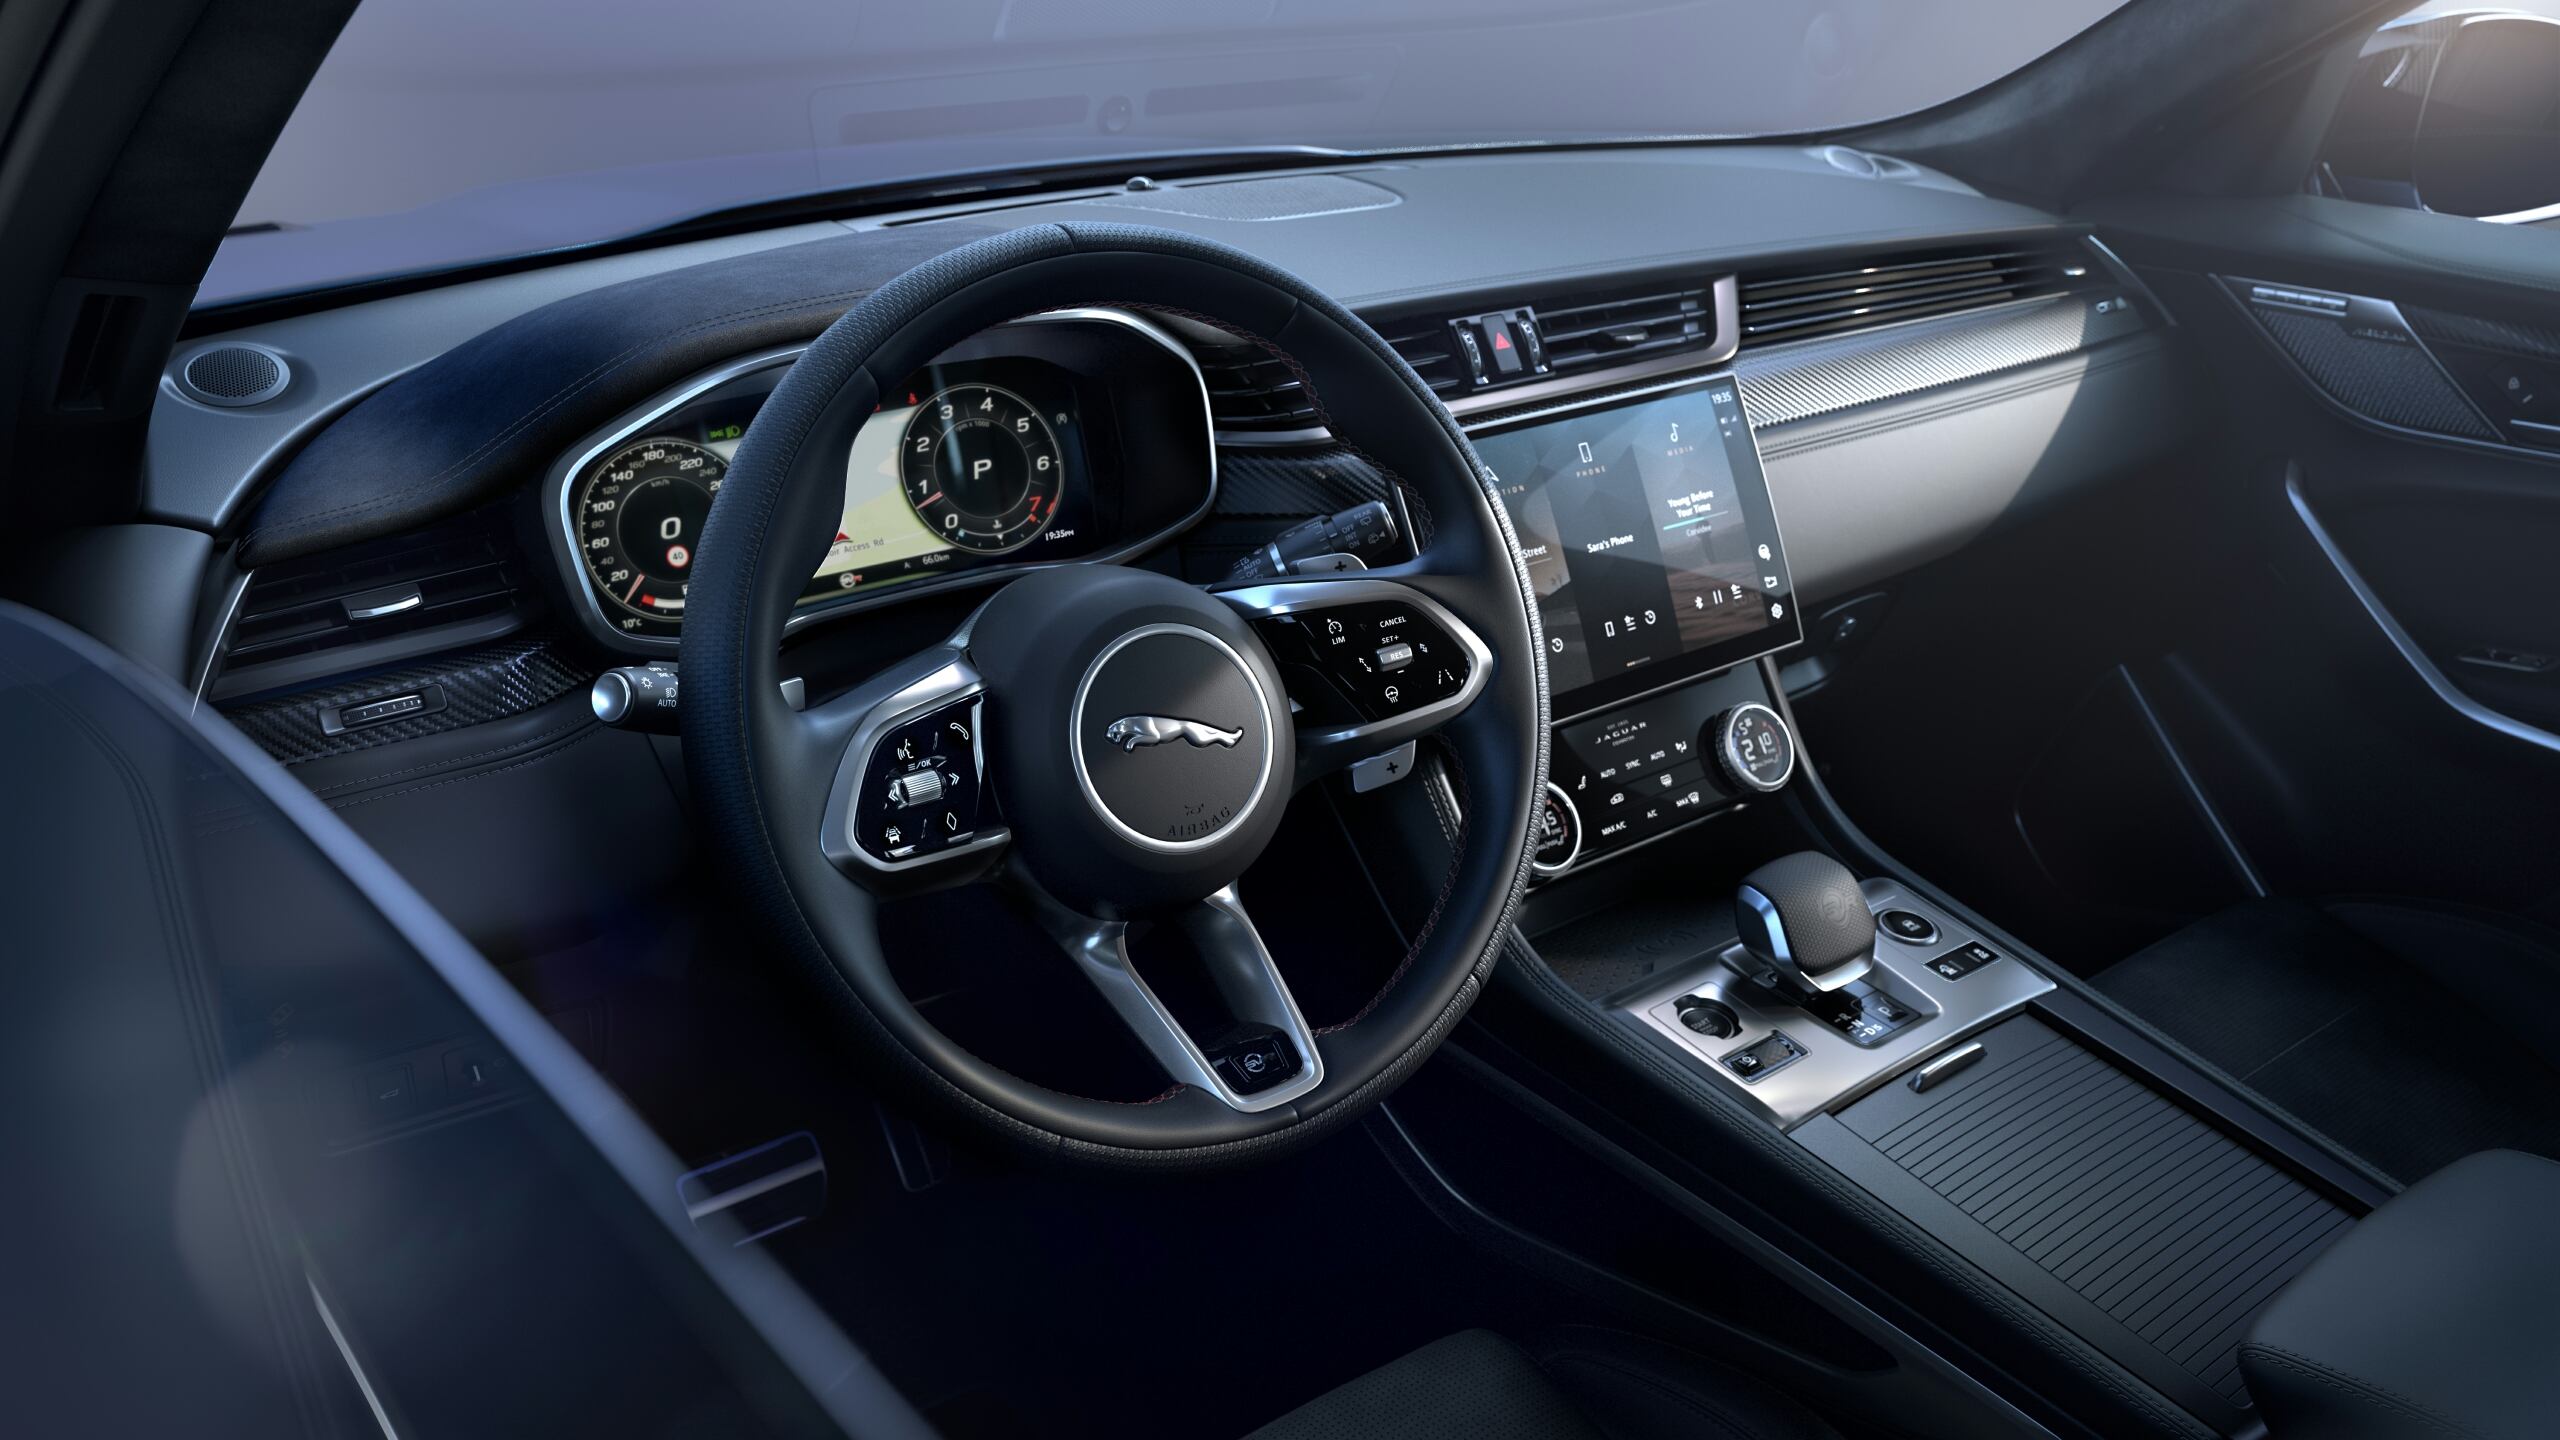 The Steering Wheel, Dashboard, And Center Console Of The Jaguar F-PACE 90th Anniversary Edition